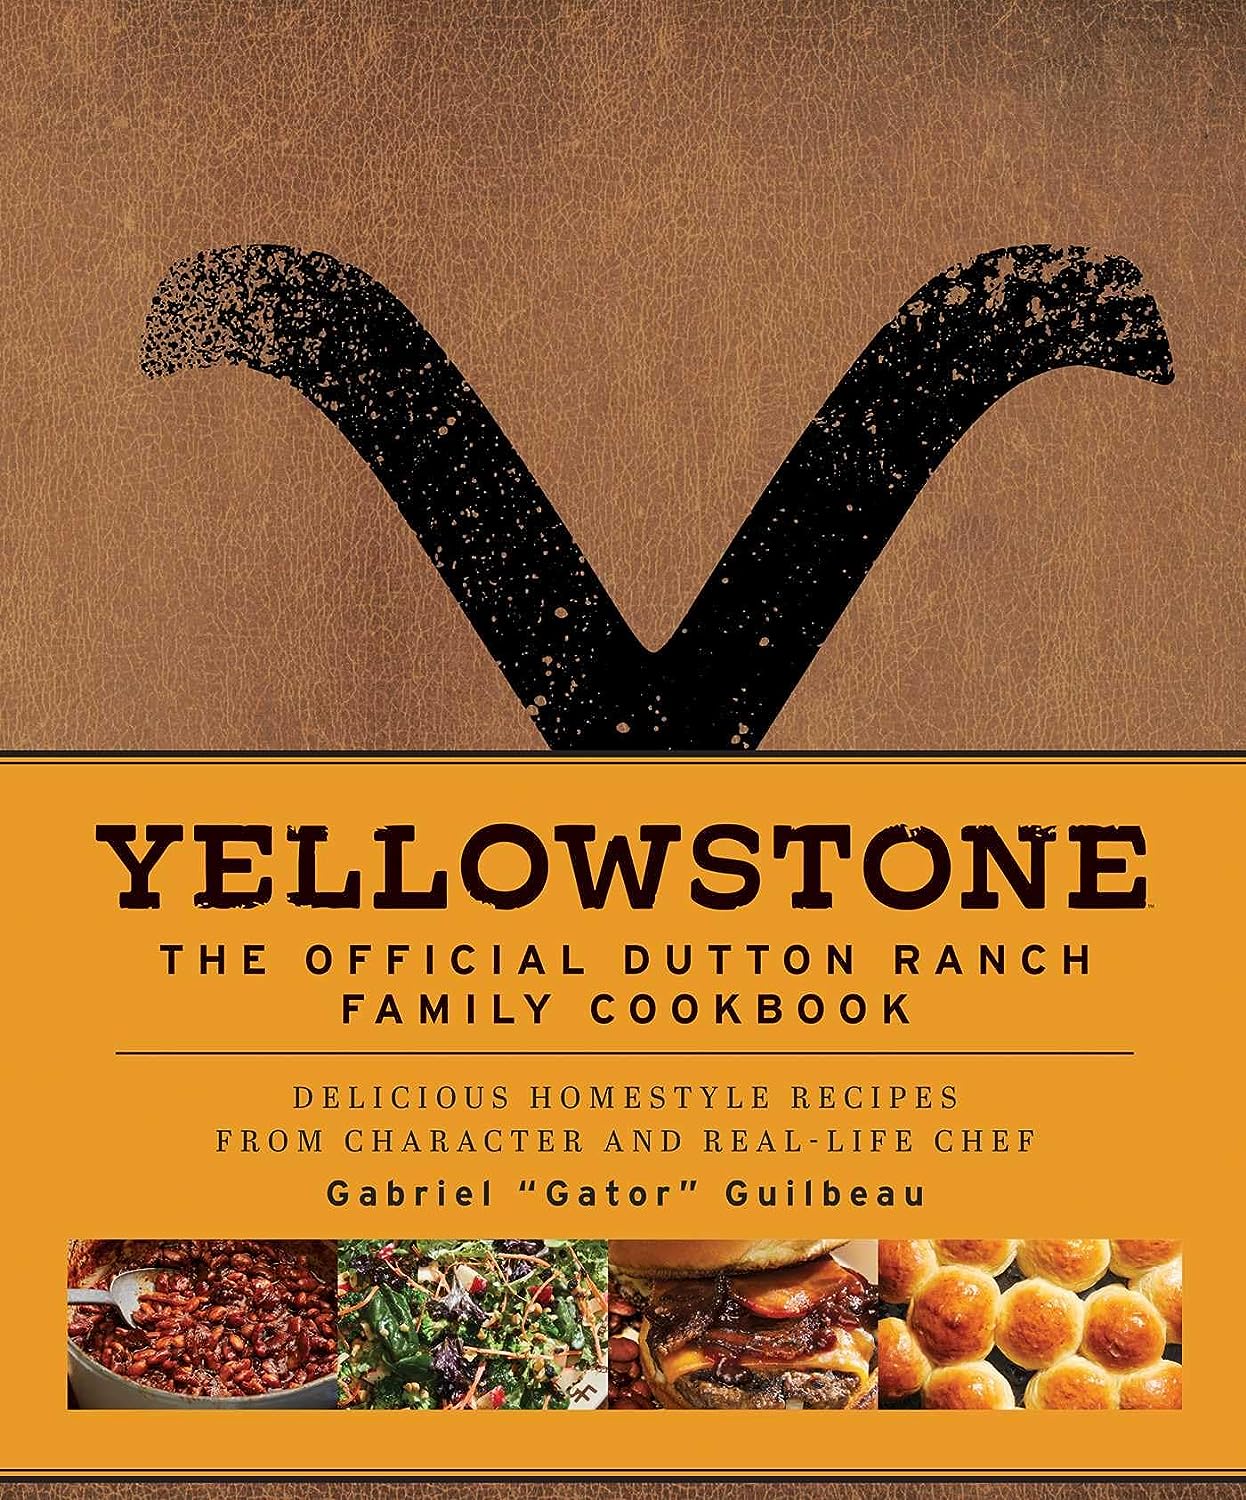 A book cover depicting photos of a variety of fresh foods over a large 'Y.'